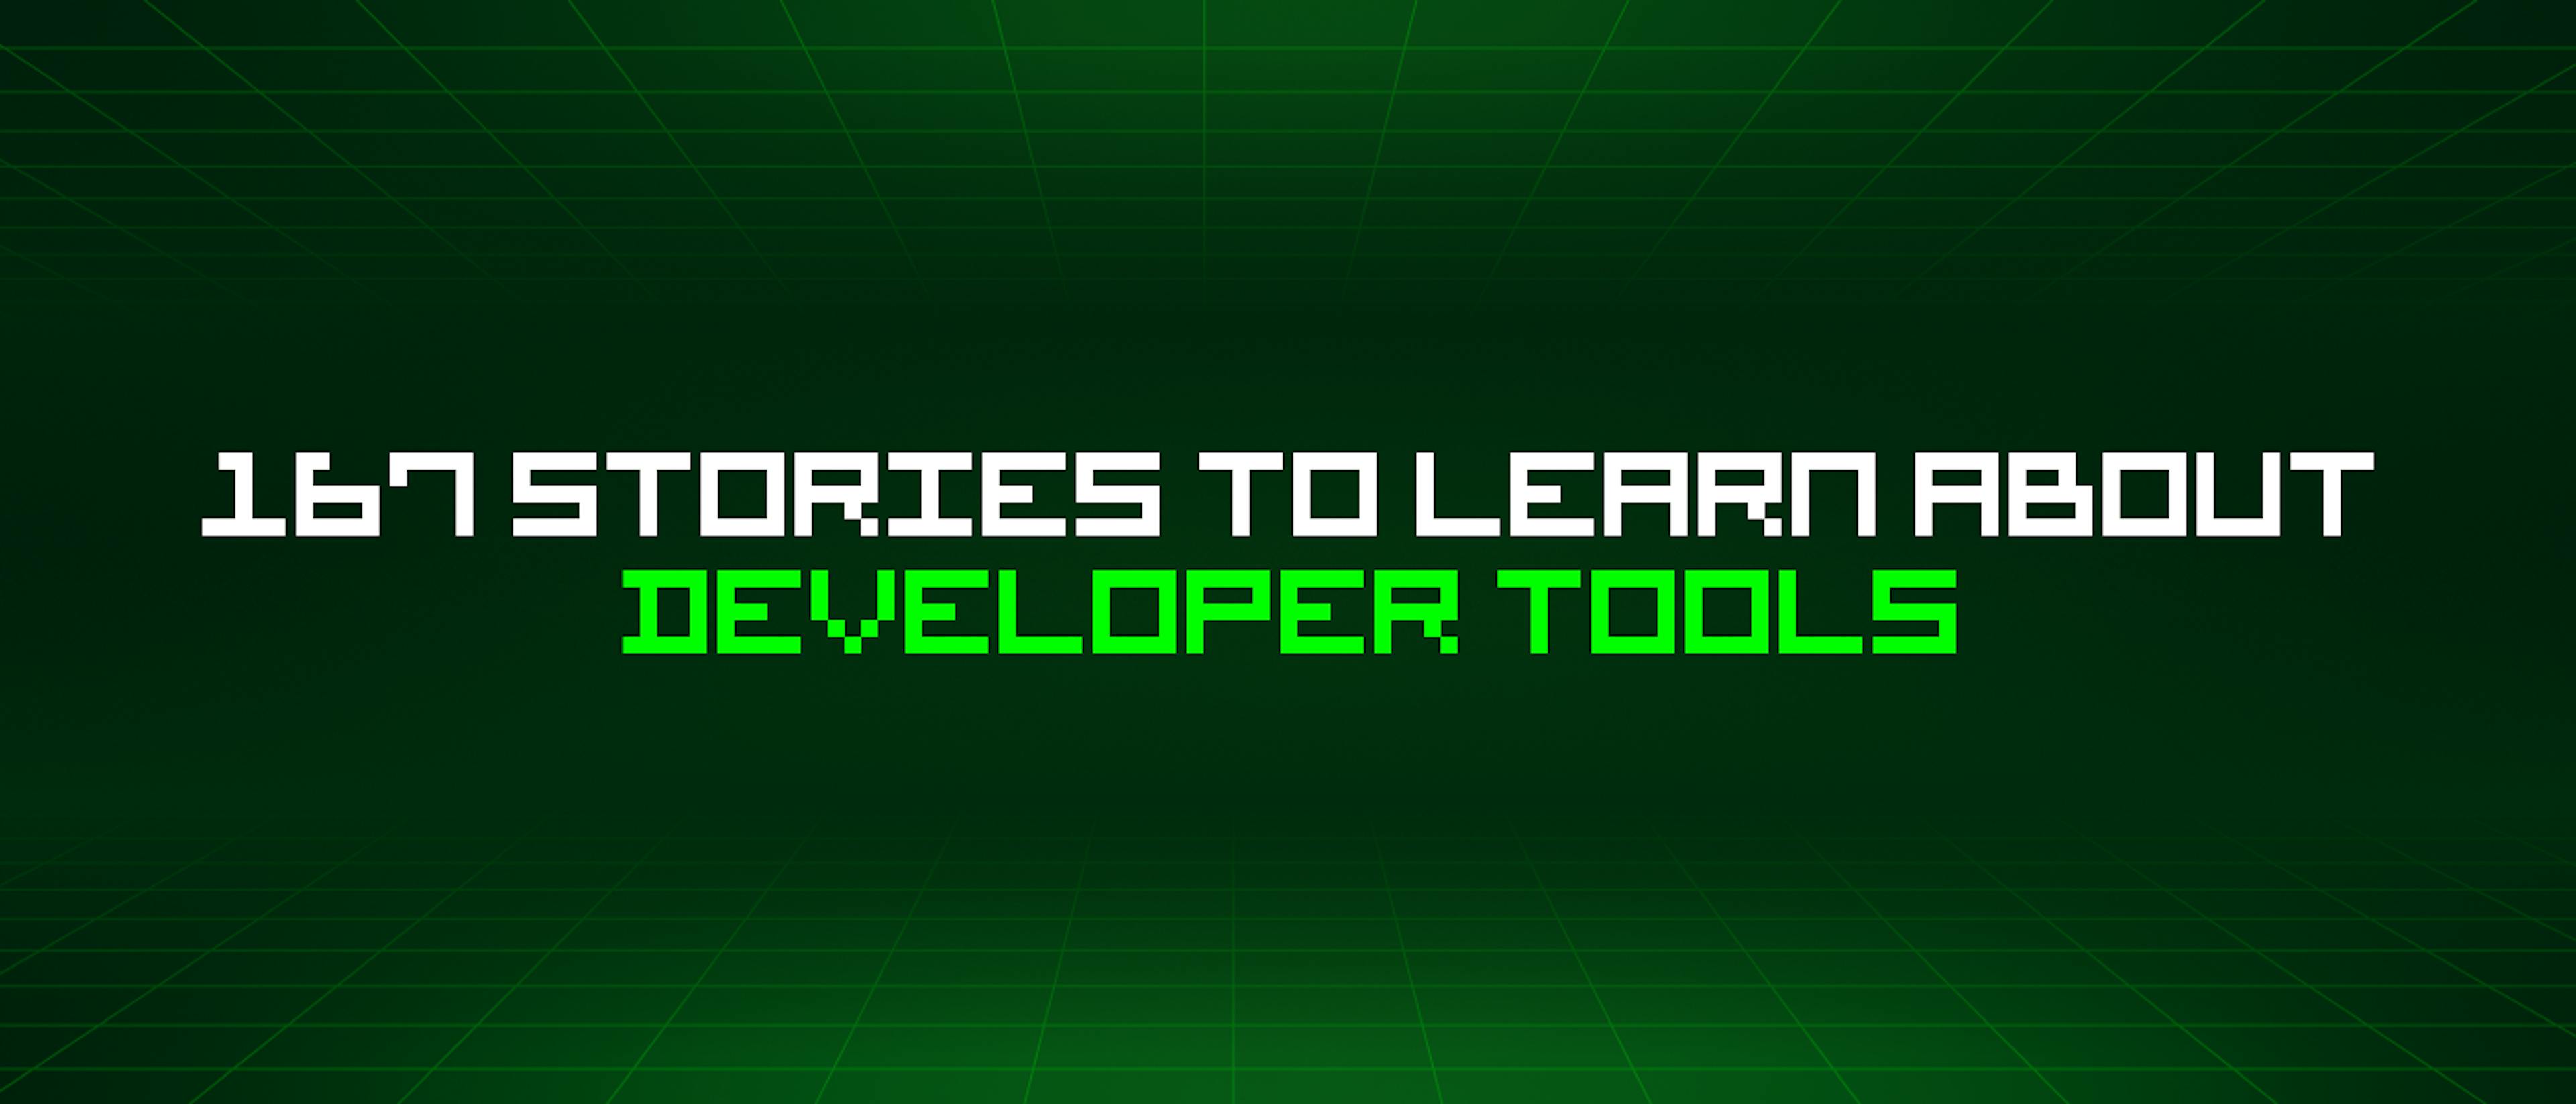 featured image - 167 Stories To Learn About Developer Tools